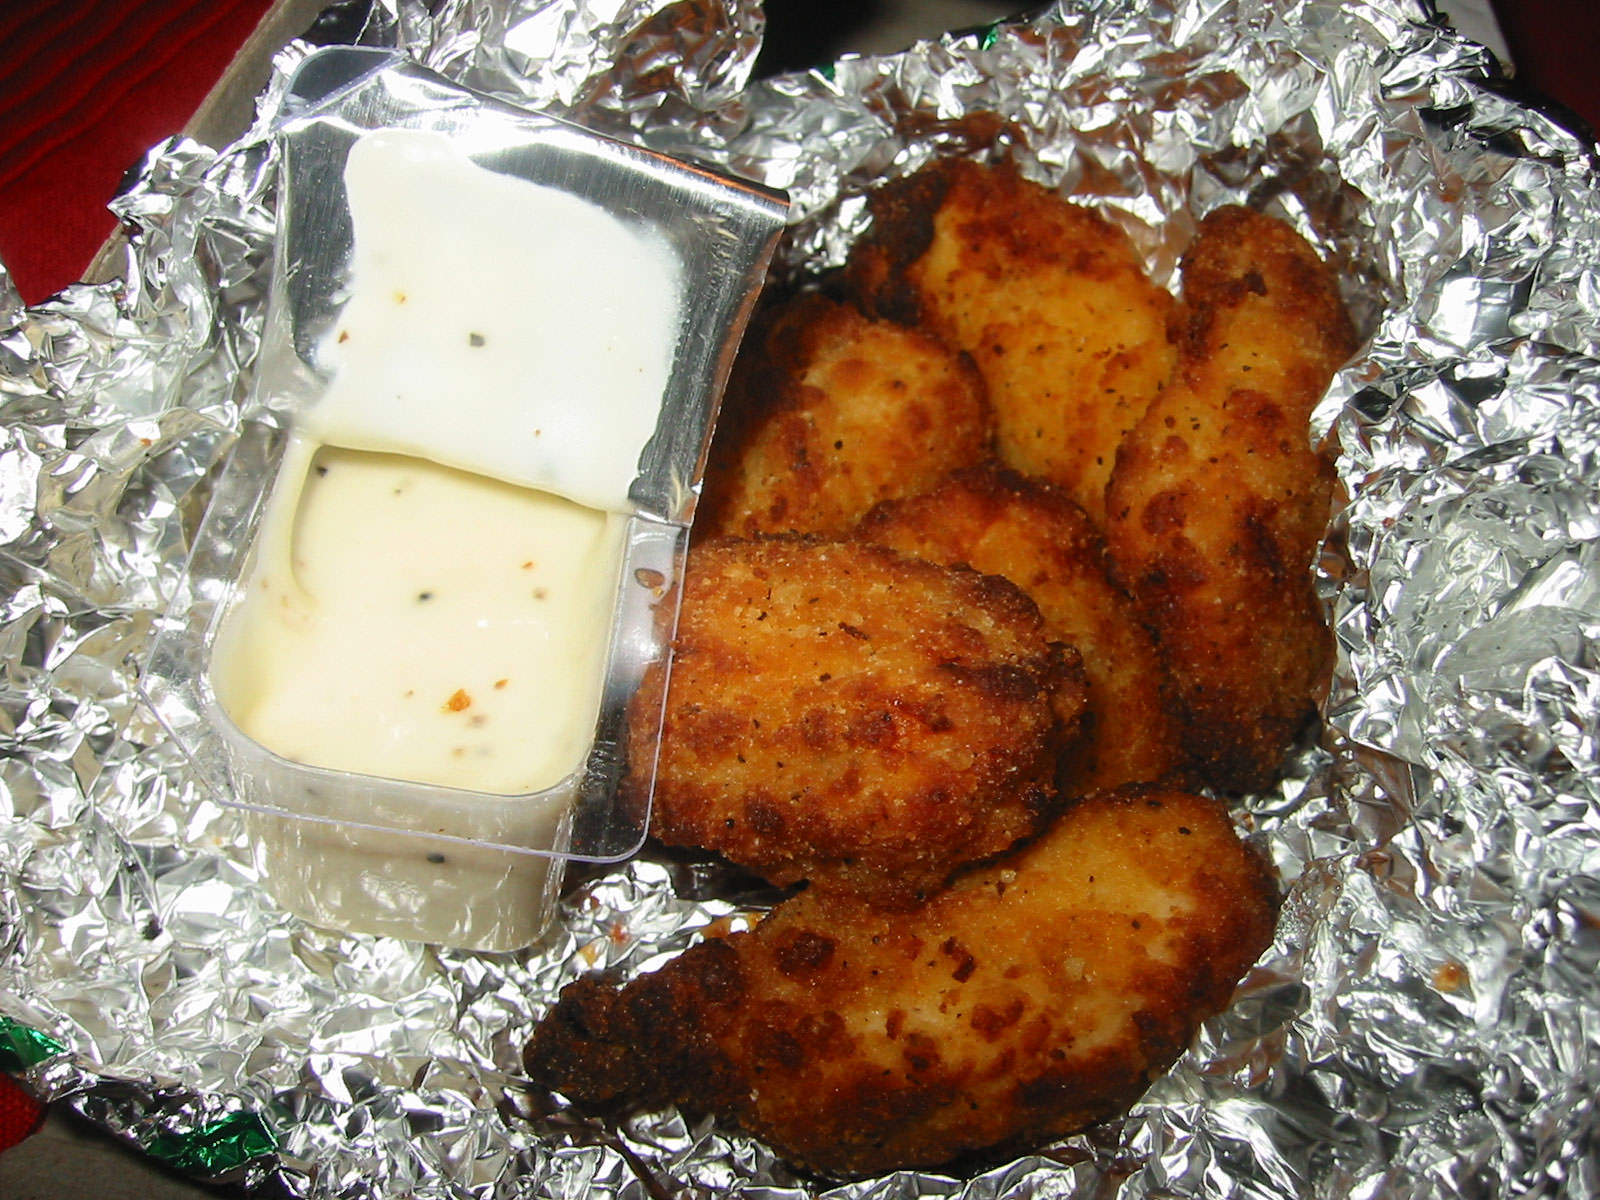 Chicken Kickers with ranch sauce